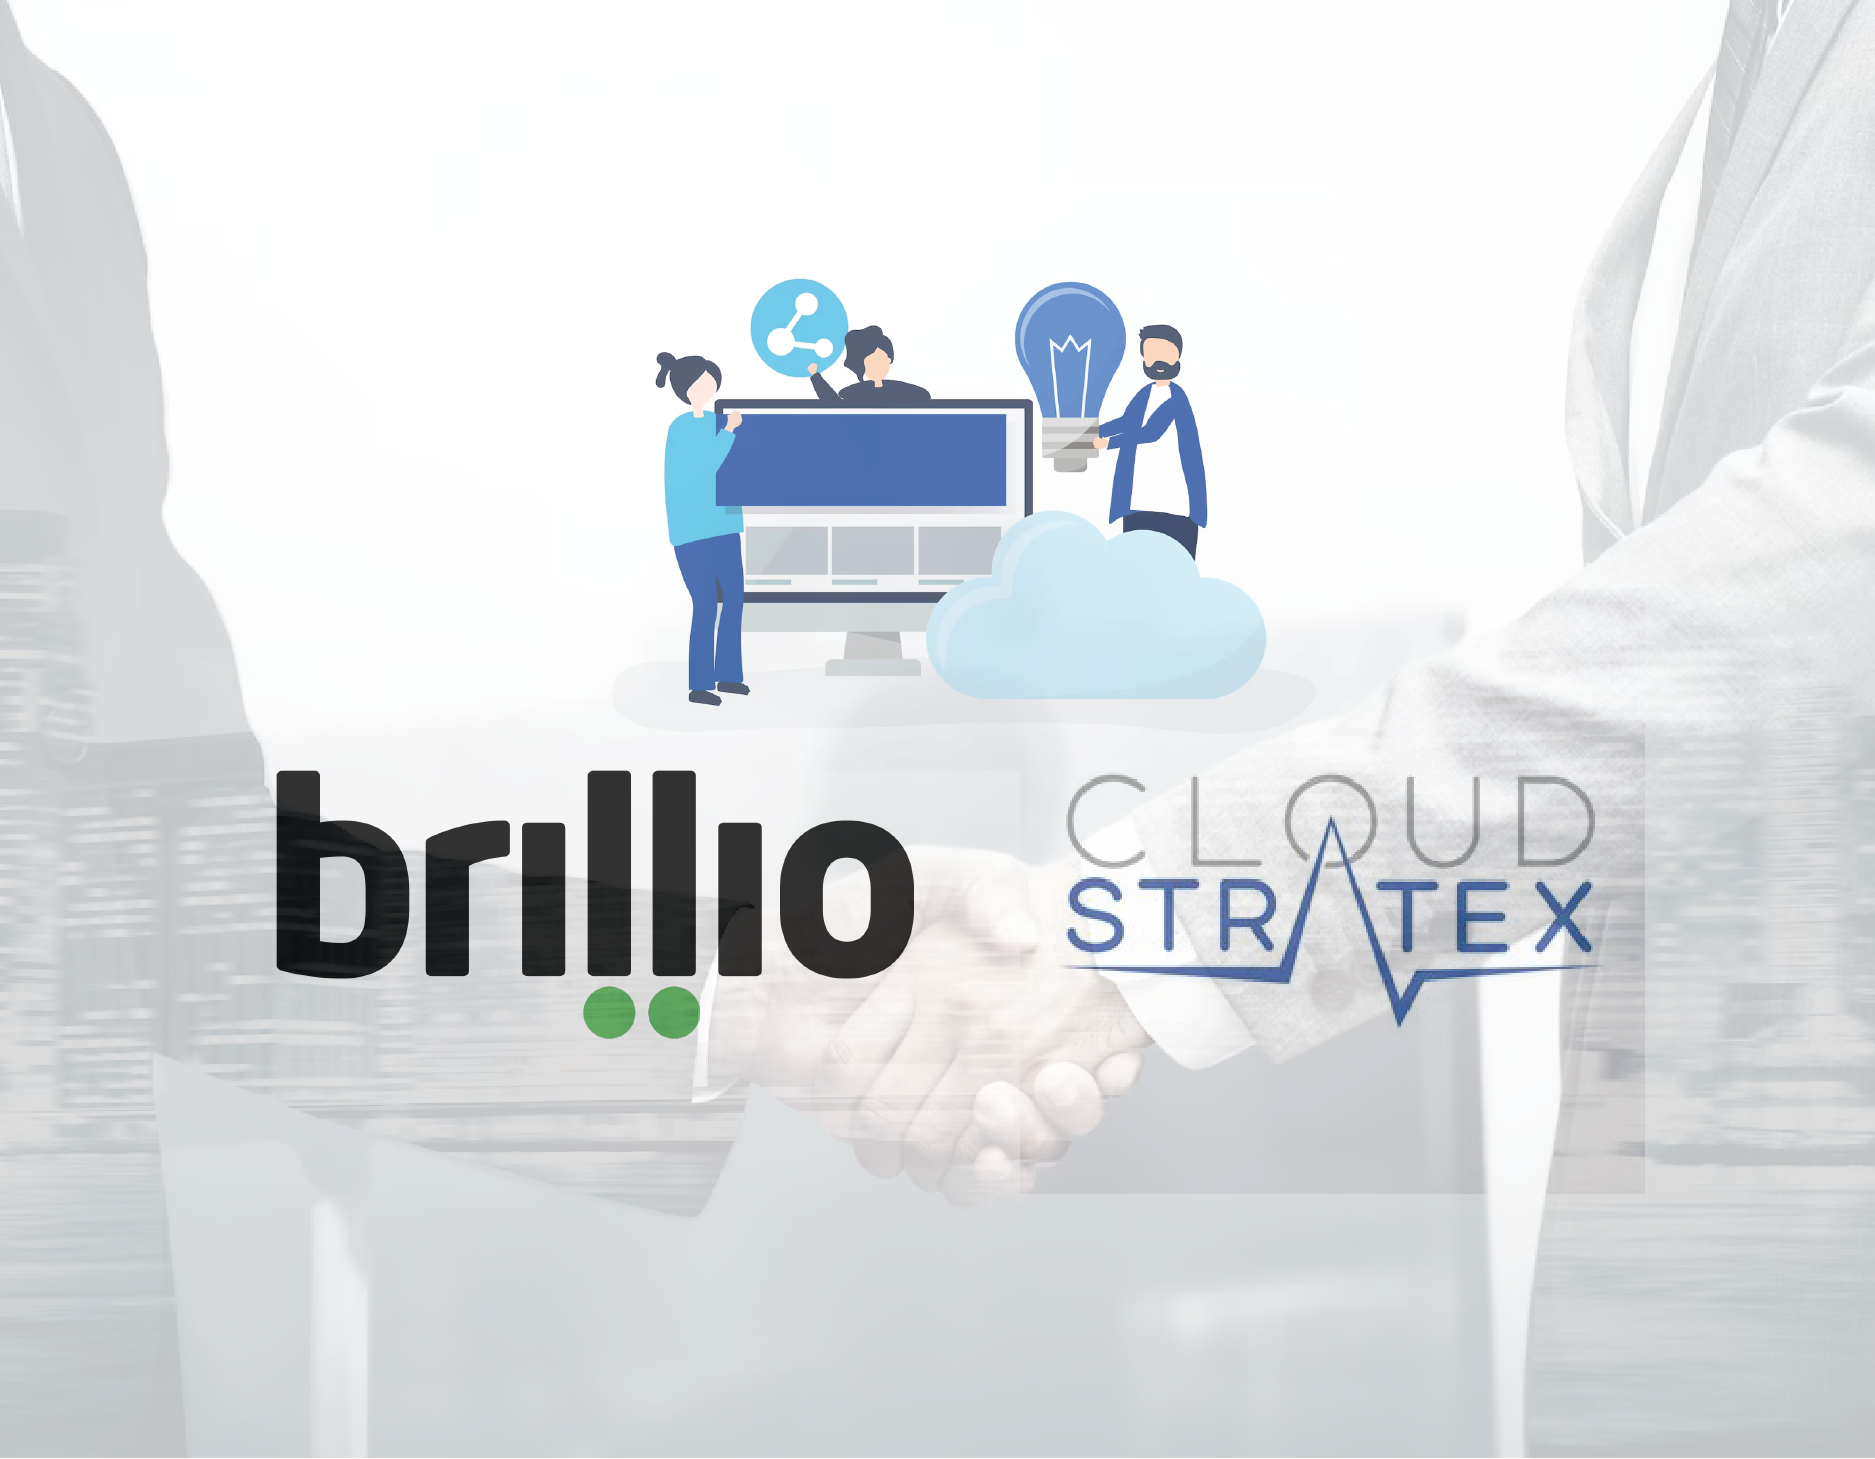 Brillio Acquires CloudStratex to Expand its Cloud Advisory and Digital Transformation Services to Clients in the UK and Europe